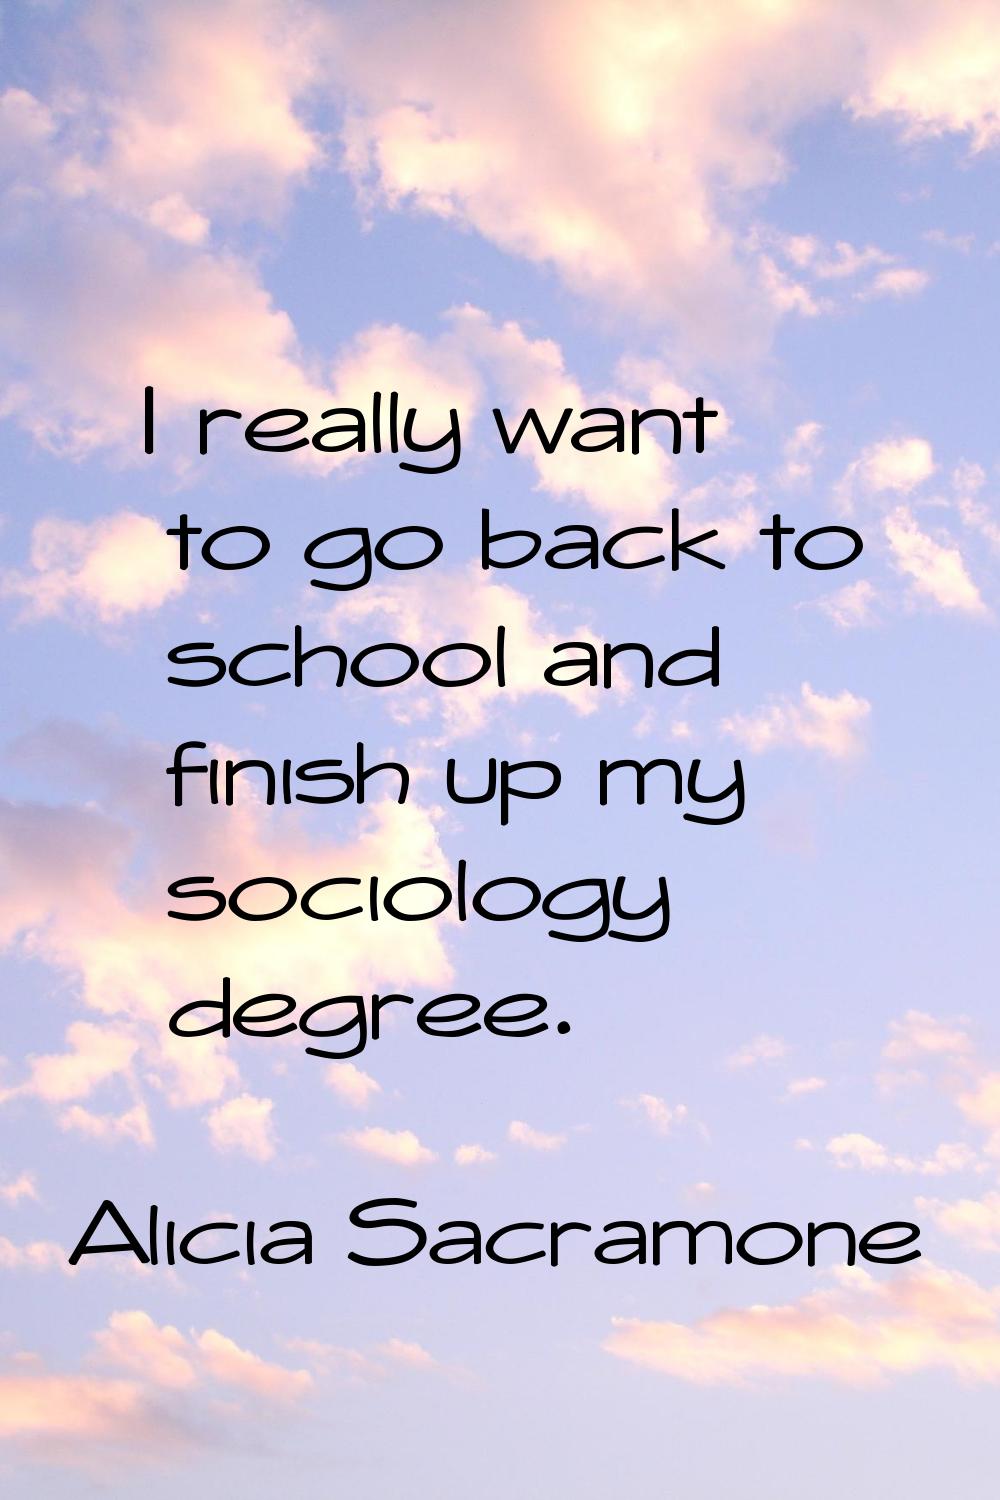 I really want to go back to school and finish up my sociology degree.